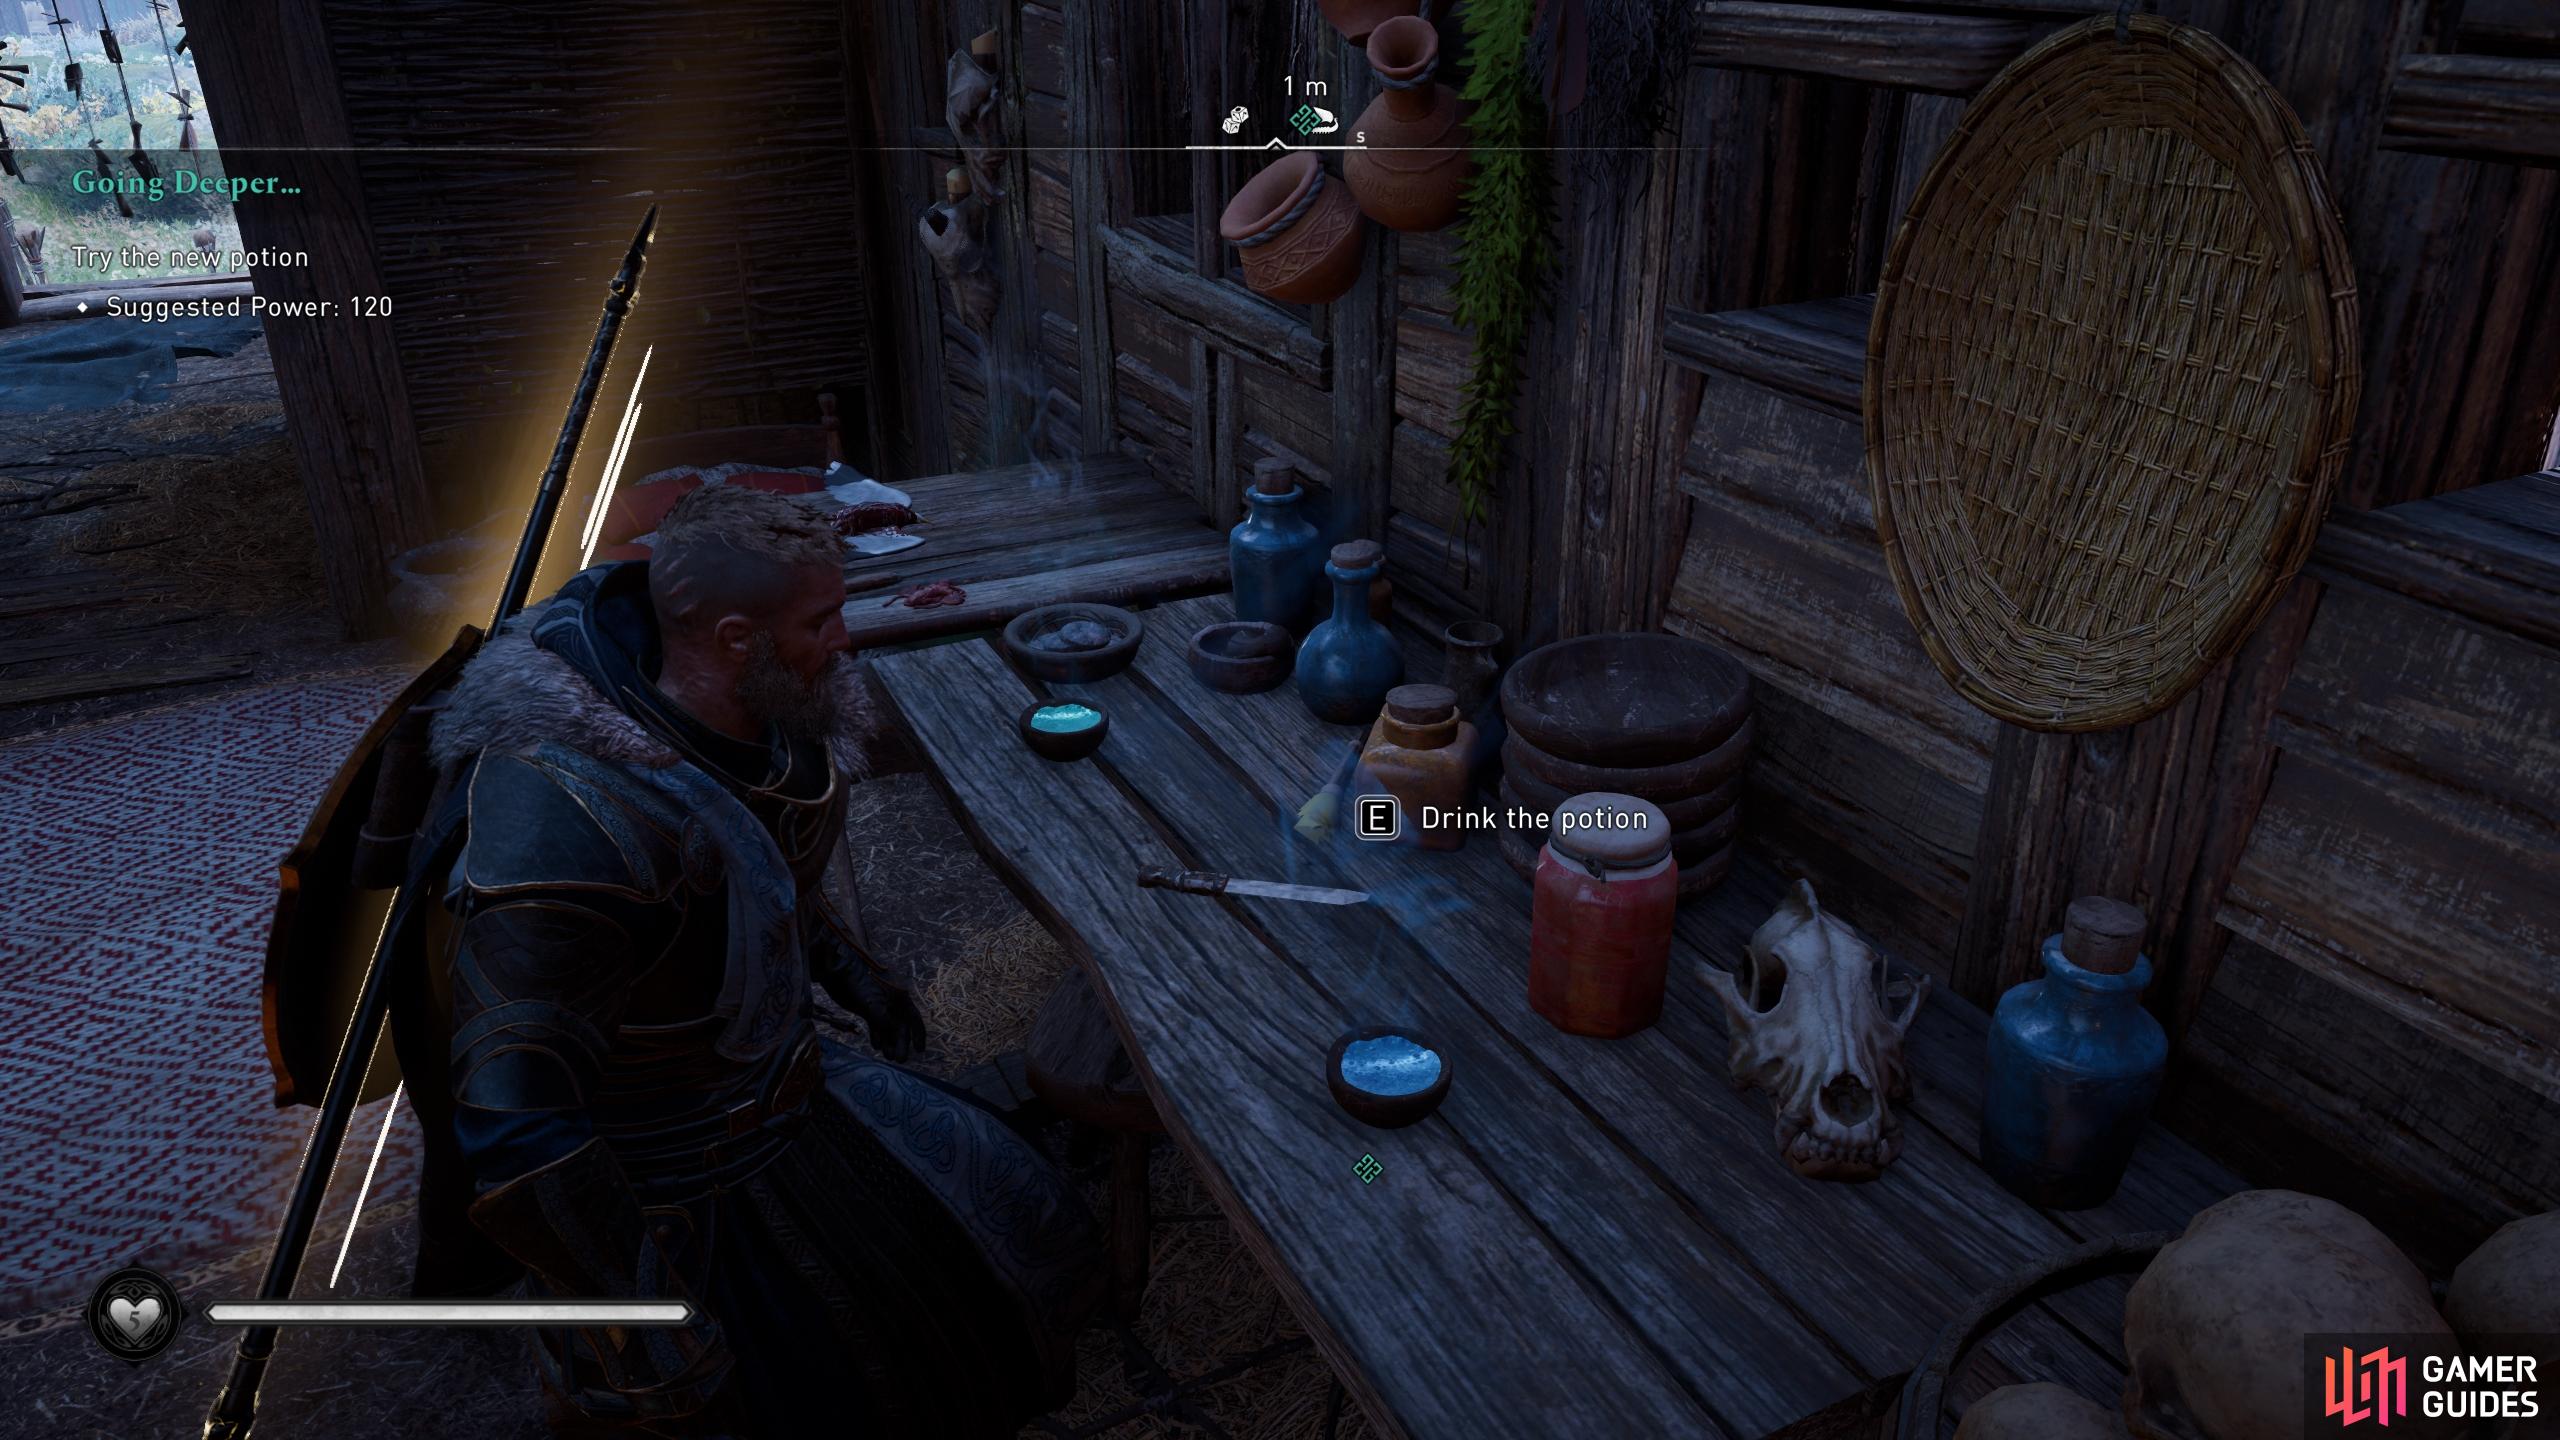 After the cutscene with Valkla, drink the potion on the right to travel to Jotunheim.